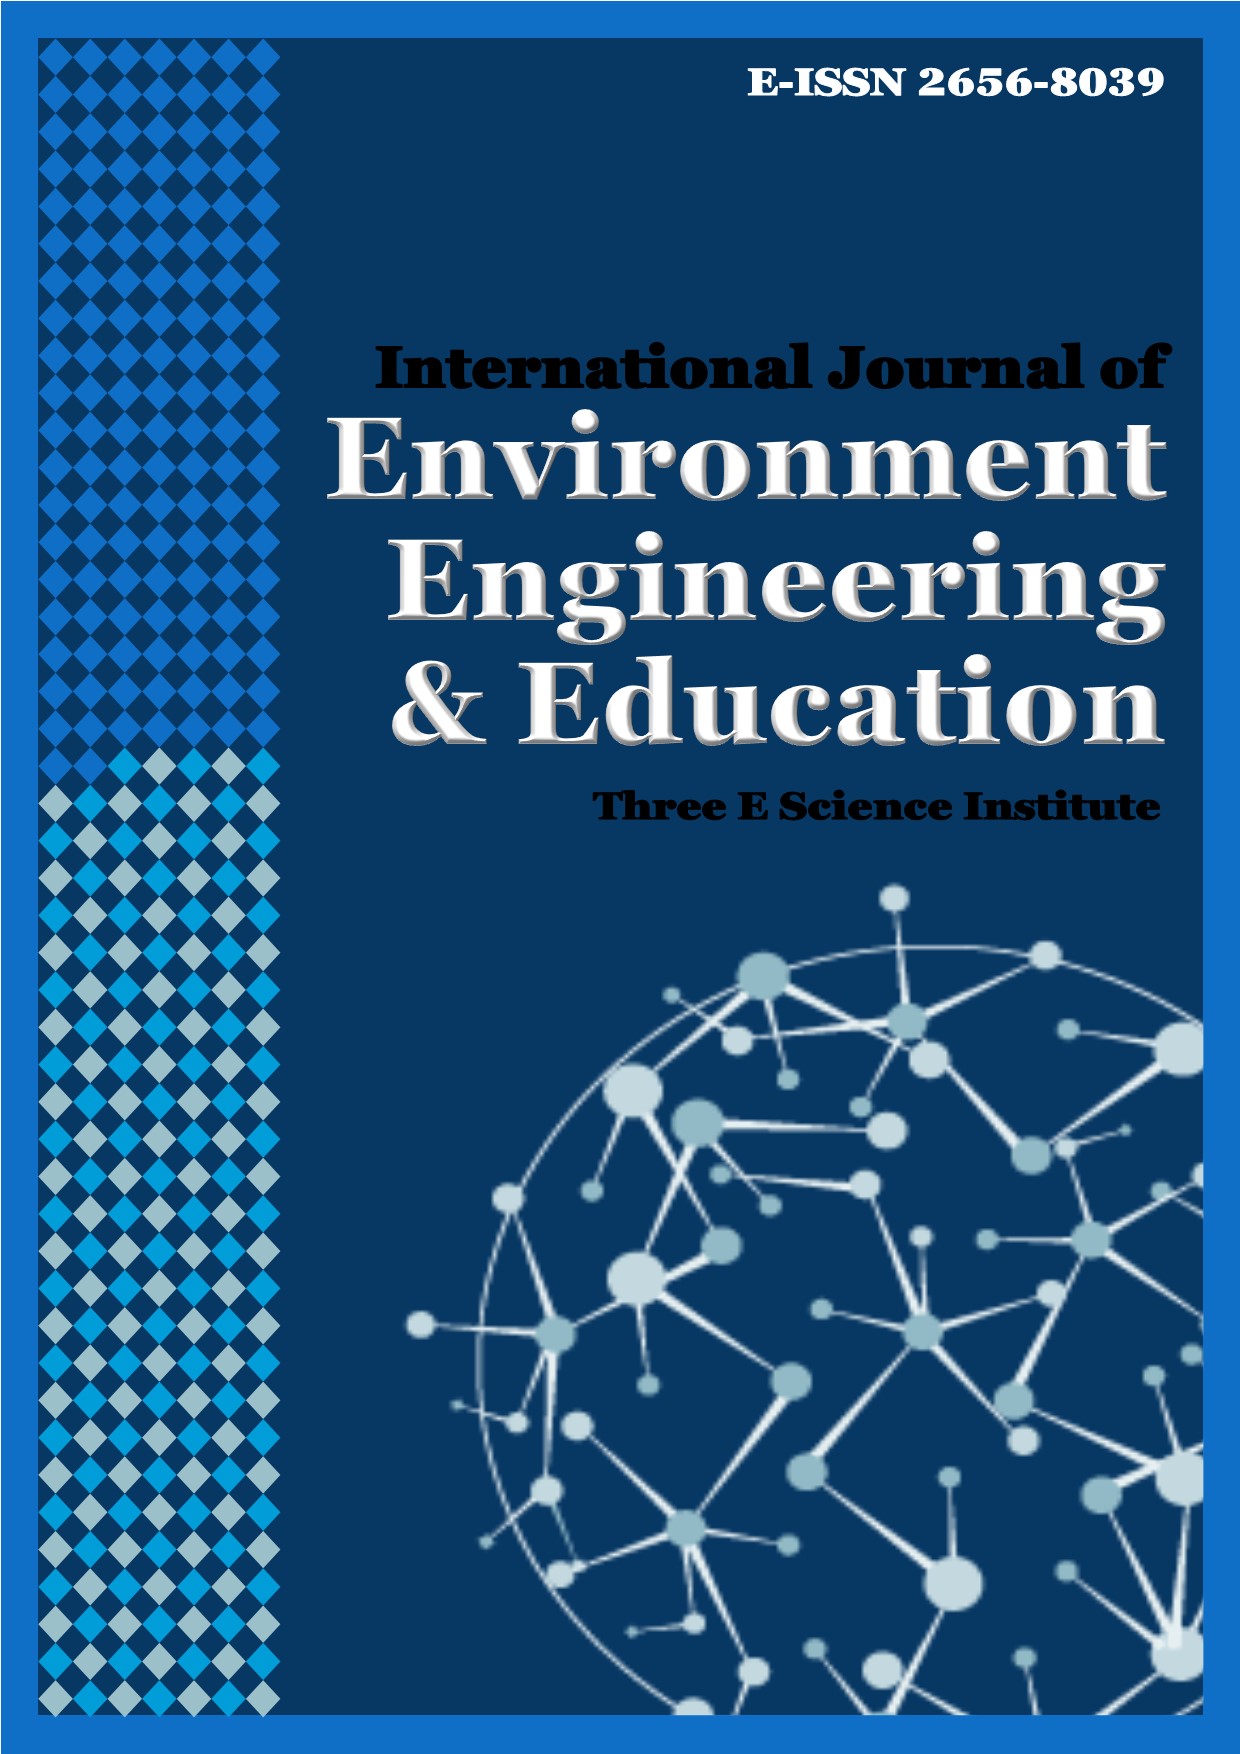 International Journal of Environment, Engineering and Education